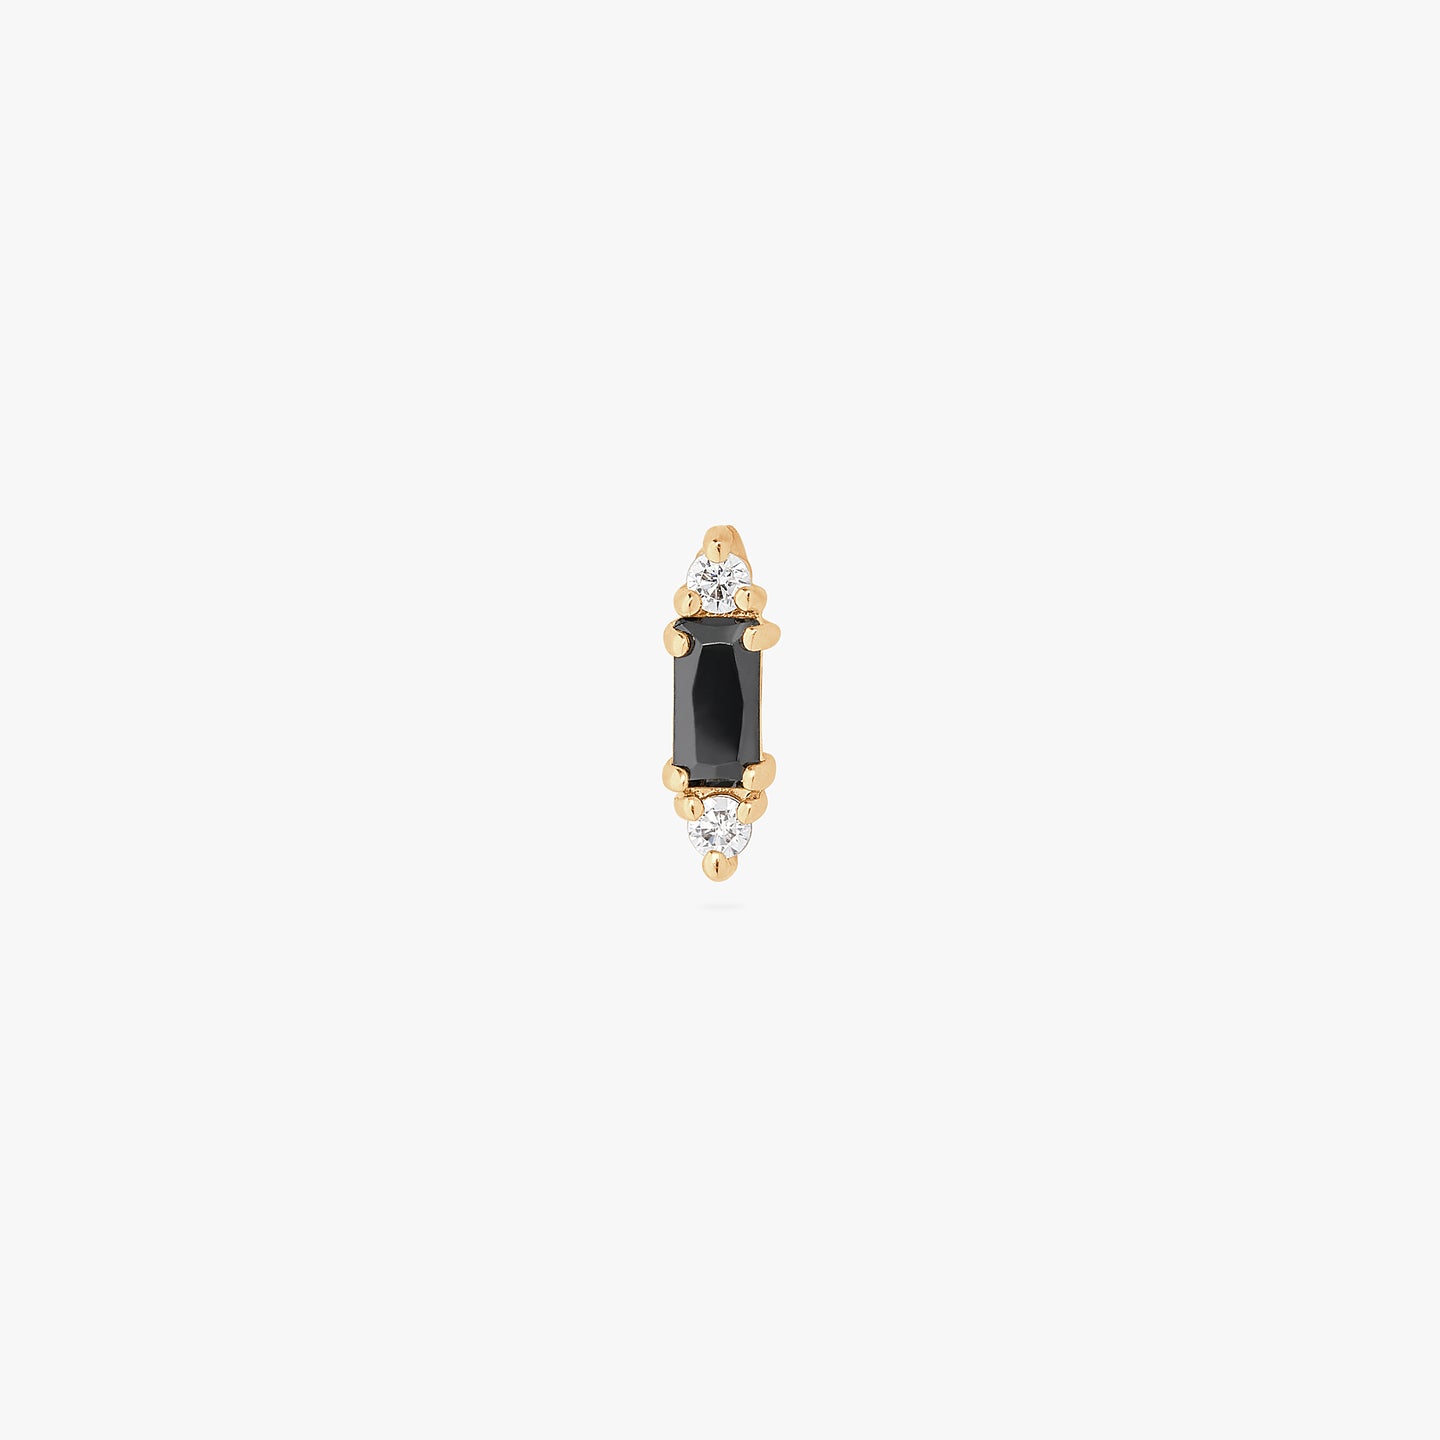 A black baguette-shaped CZ stud with two gold/clear CZs on the end of the baguette. color:null|gold/black